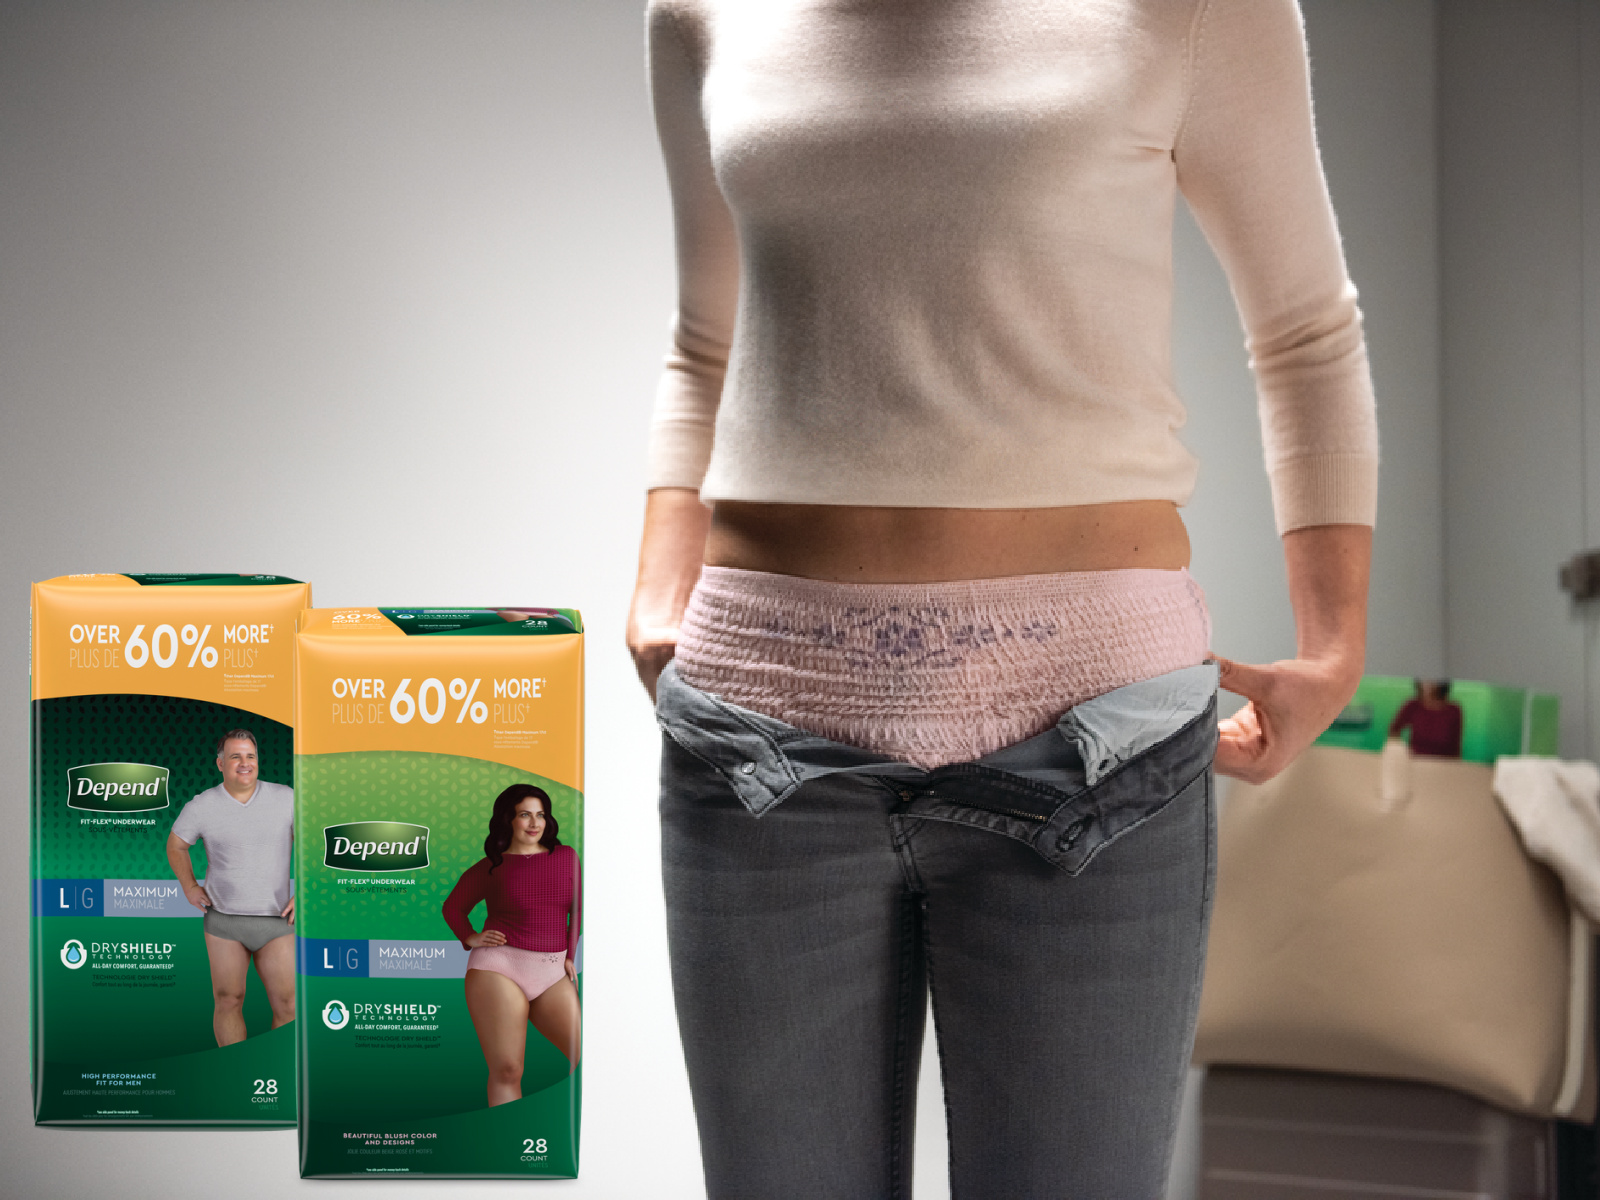 Be Up To 100% Leak Free With Depend® - Save $3 Now At Publix on I Heart Publix